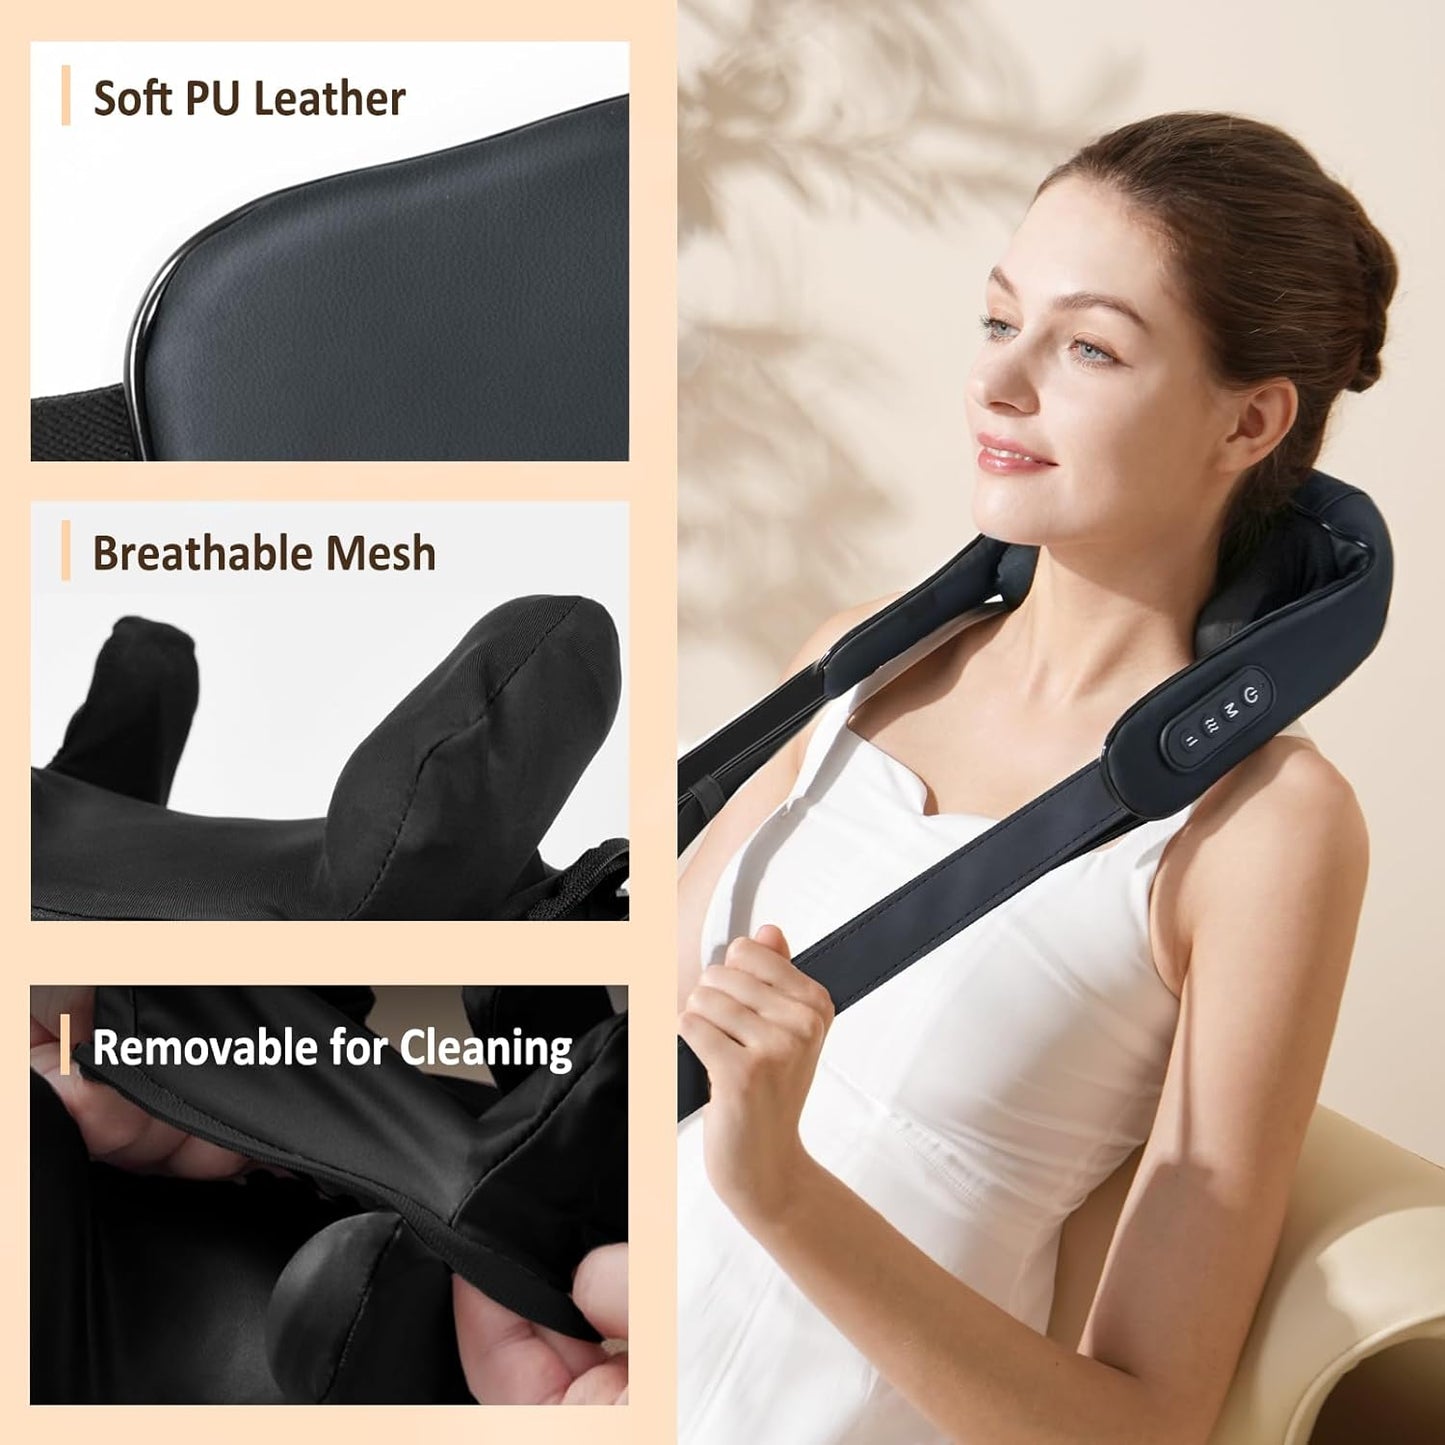 Neck Massager with Heat, Cordless Deep Tissue 4D Expert Kneading Massager, Shiatsu Neck and Shoulder Massage Pillow for Neck, Traps, Back and Leg Pain Relief, Gifts for Men Women Mom Dad